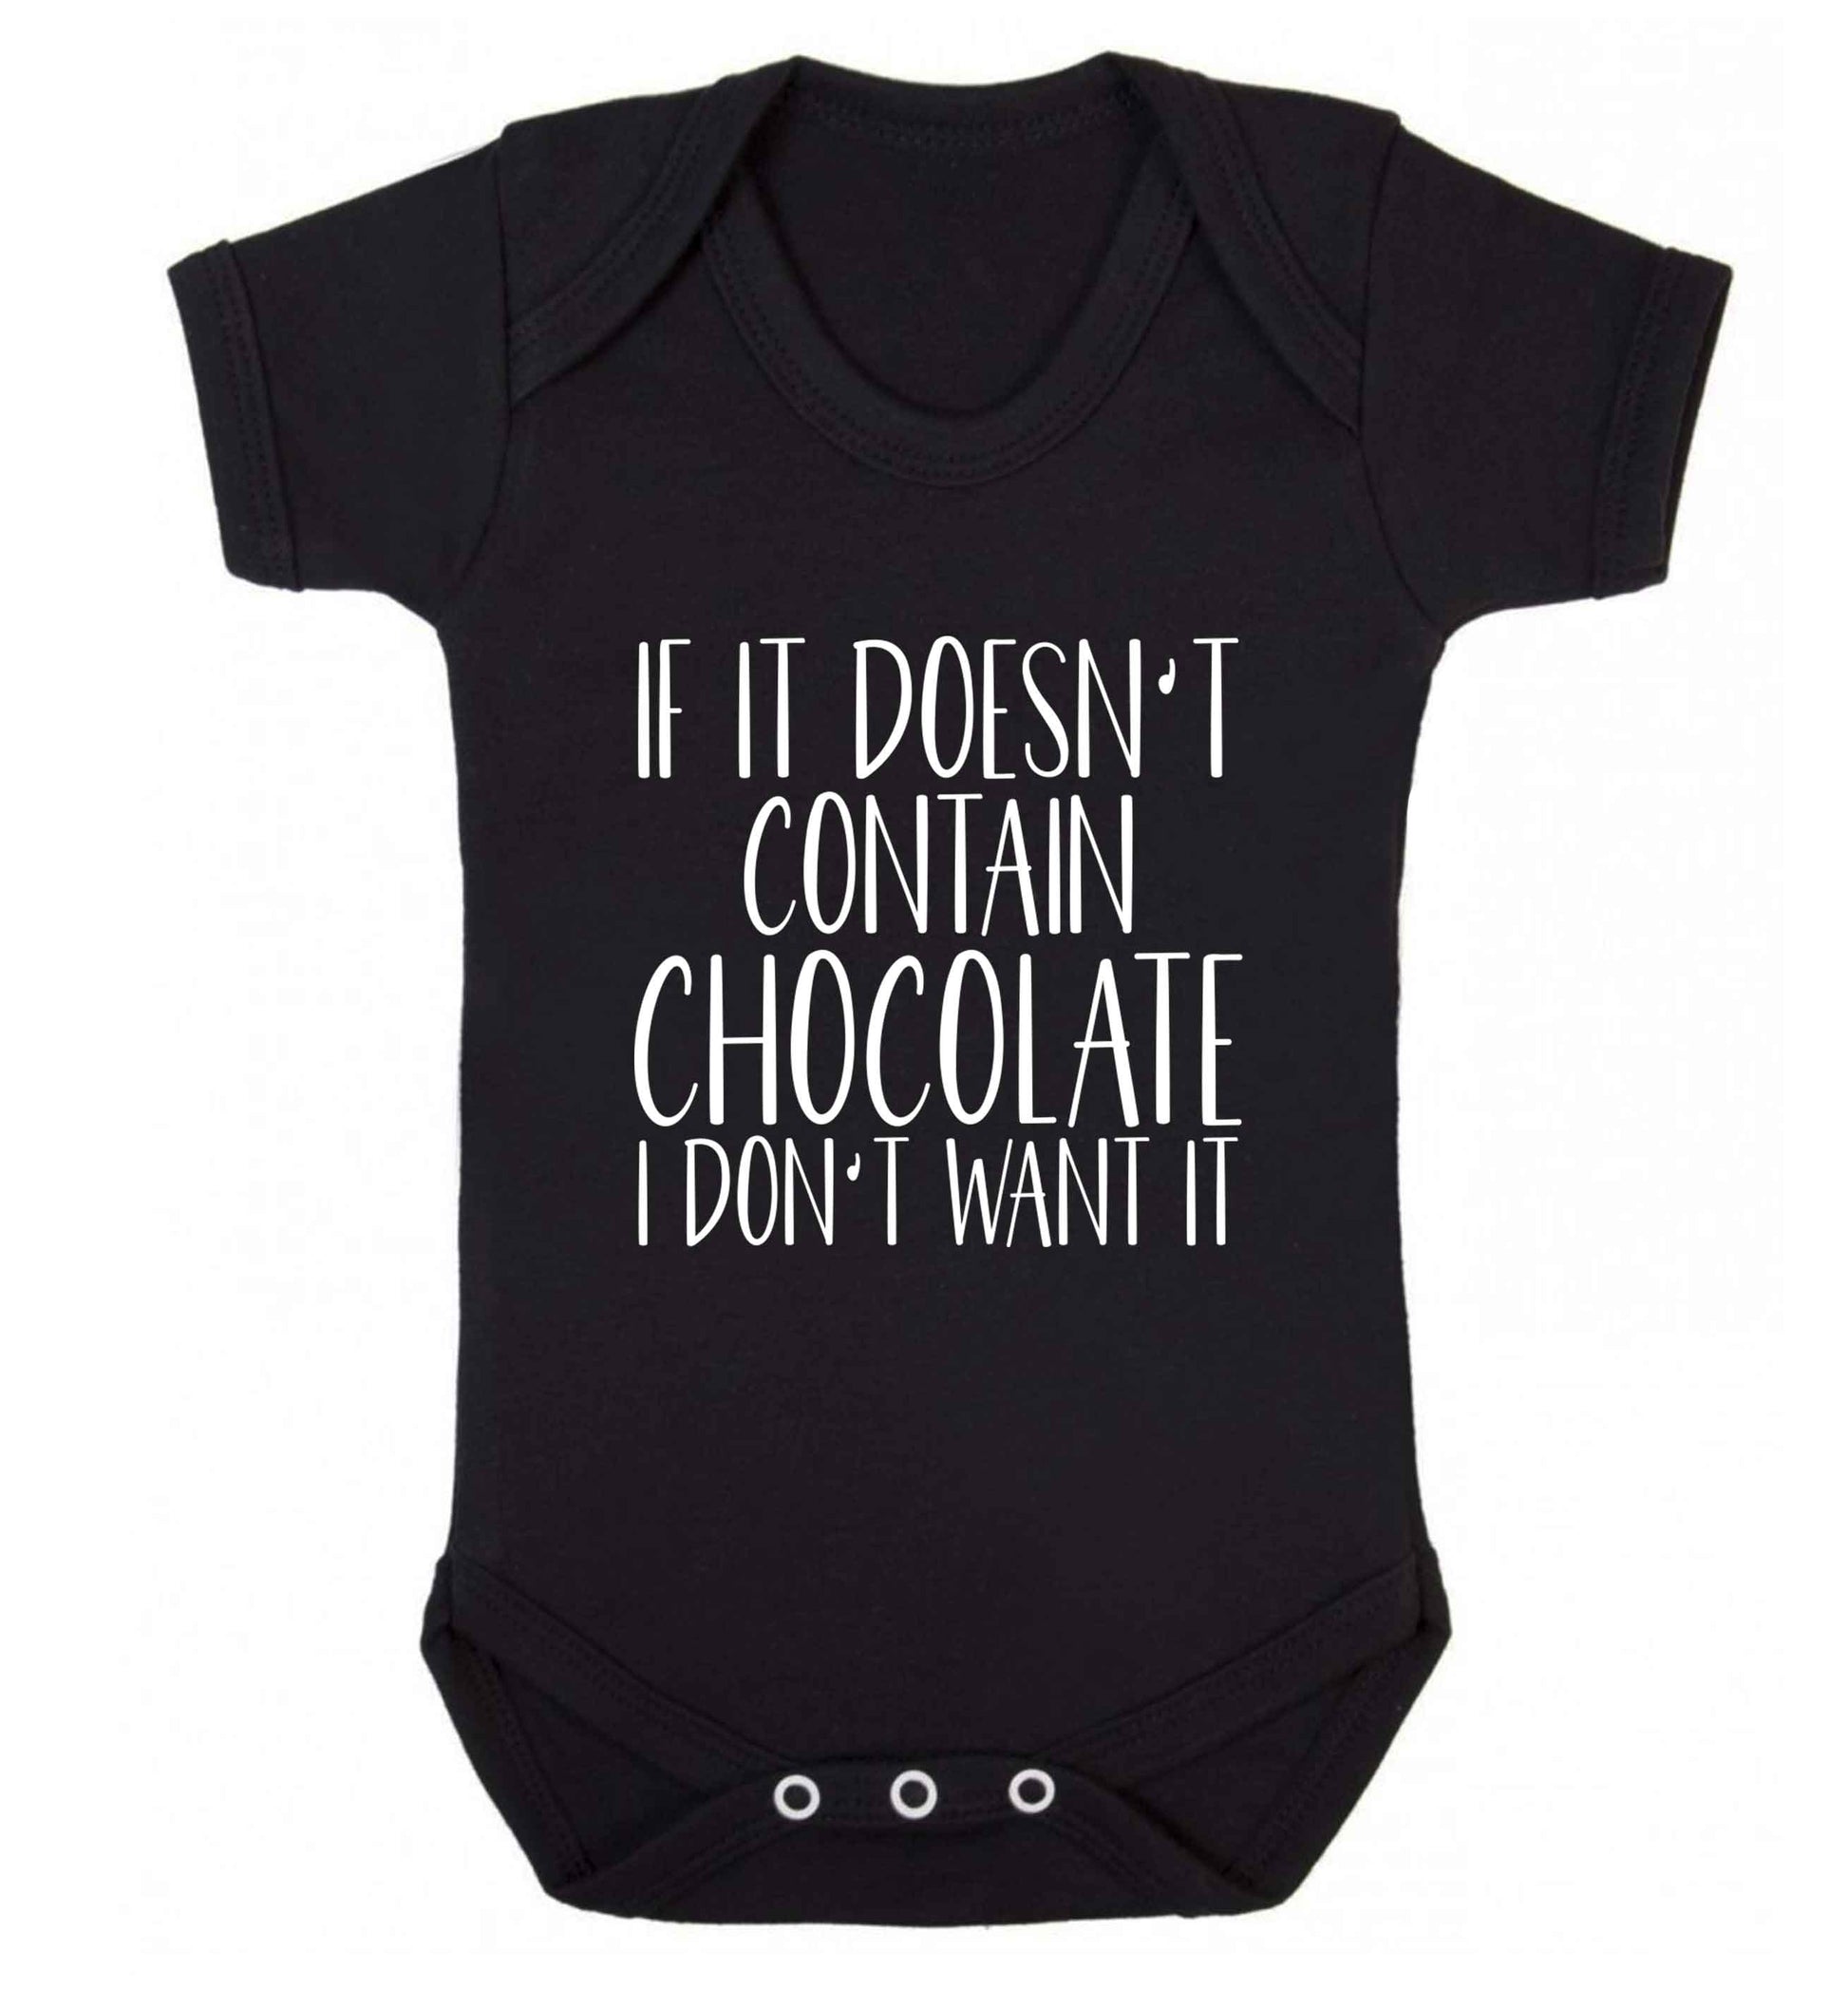 If it doesn't contain chocolate I don't want it baby vest black 18-24 months